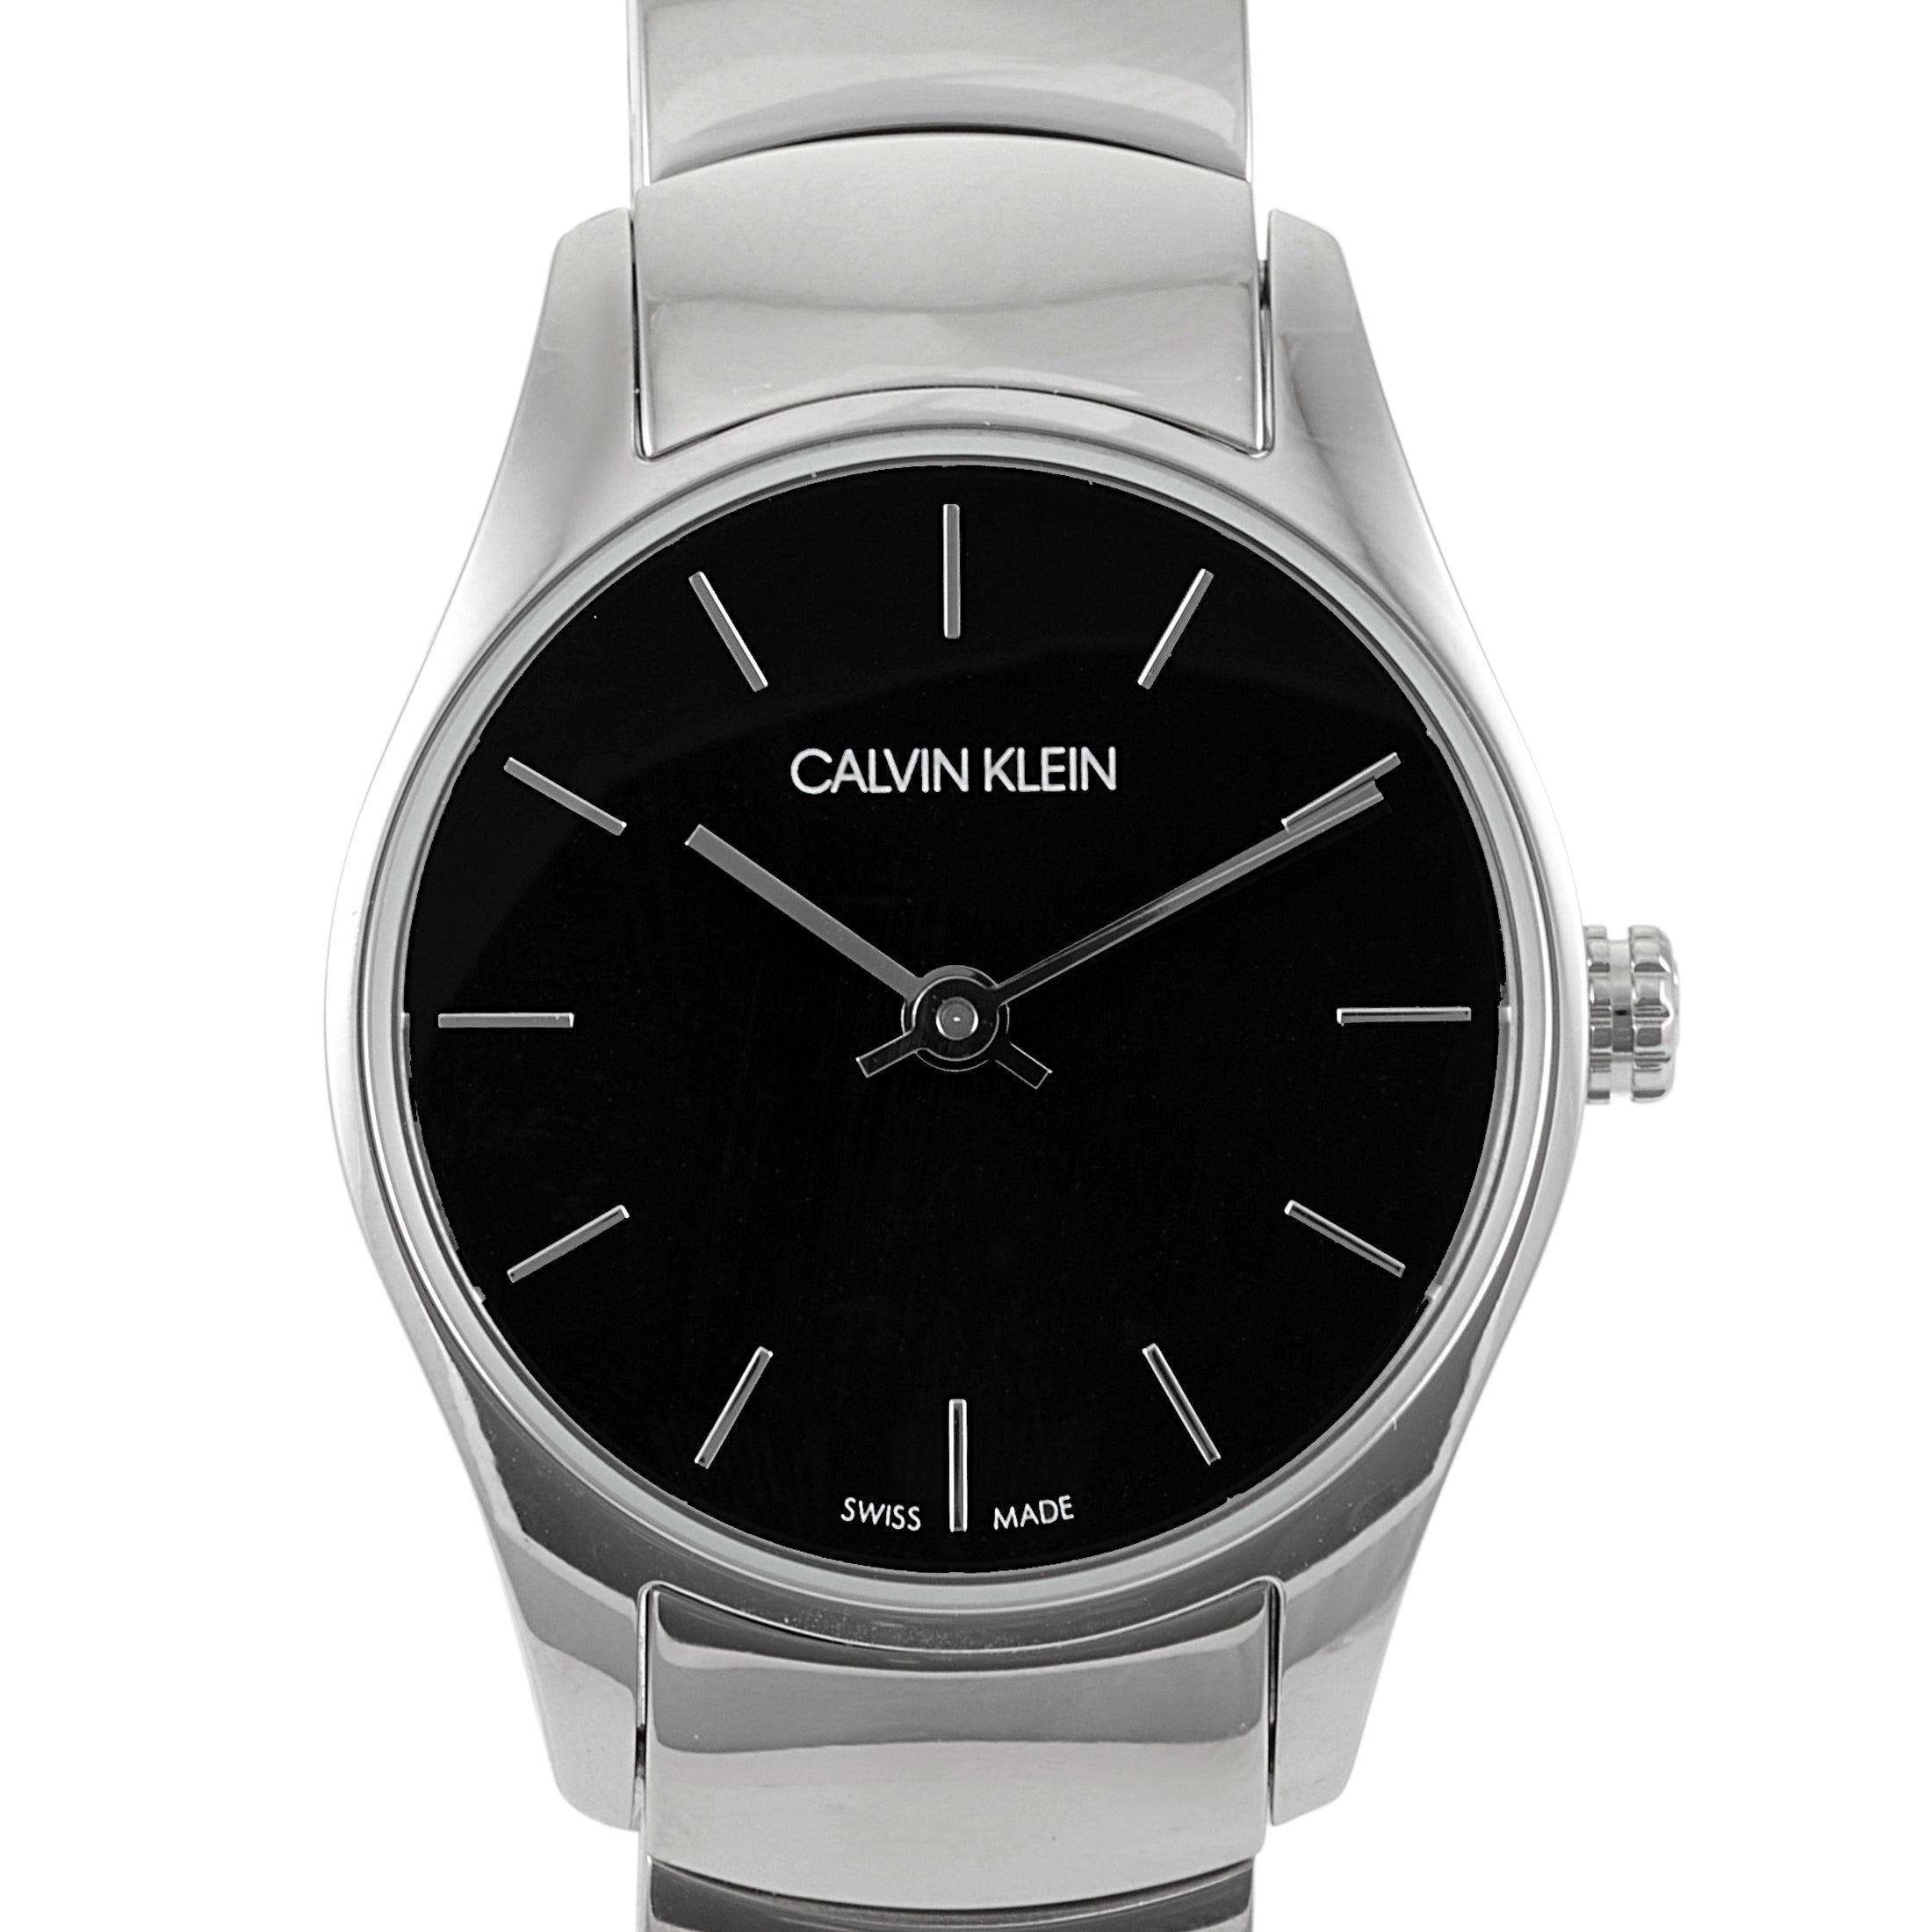 Calvin Klein Classic Stainless Steel Black Dial Watch K4d2314v | Lyst